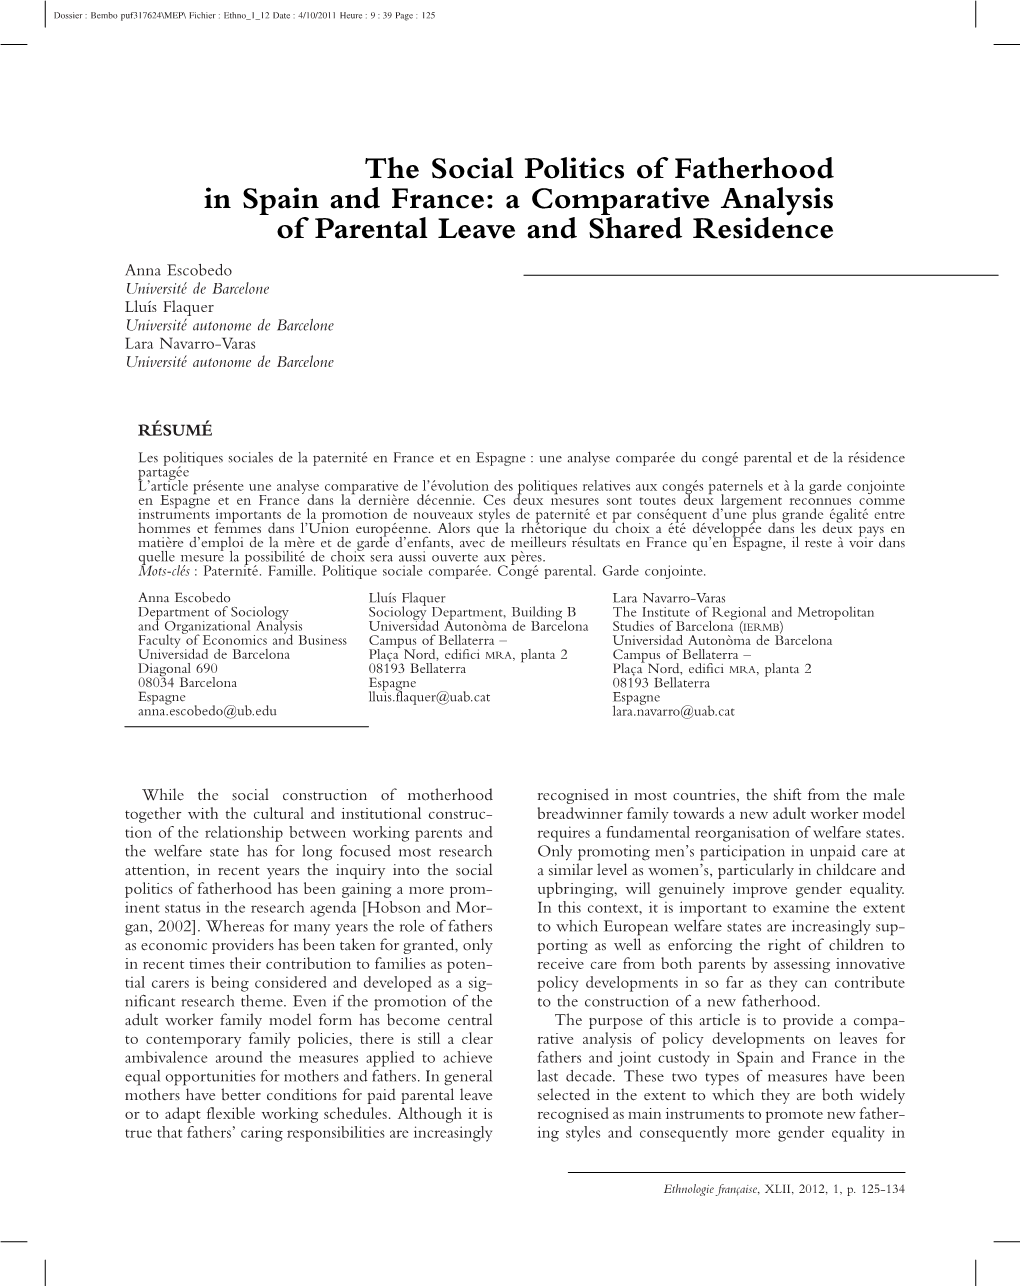 The Social Politics of Fatherhood in Spain and France: a Comparative